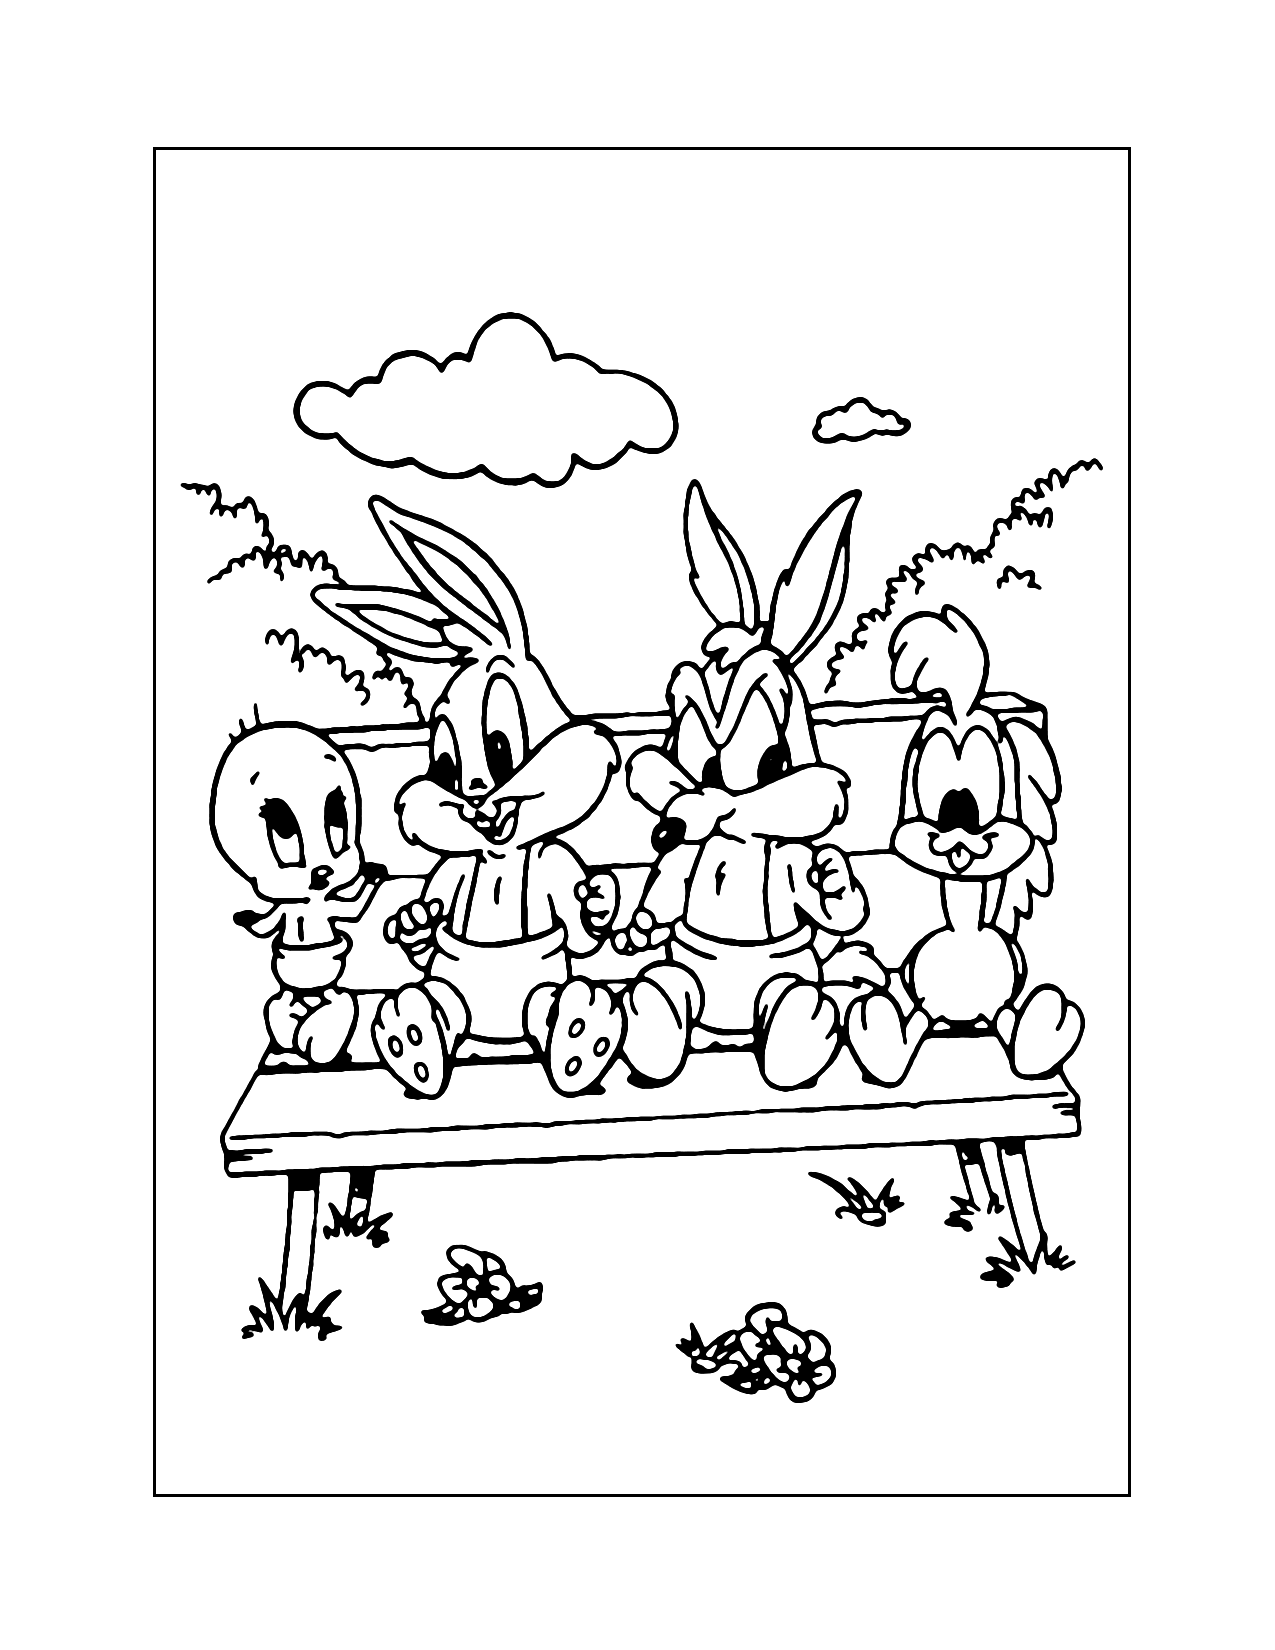 Baby Looney Tunes Sitting On A Bench Coloring Page